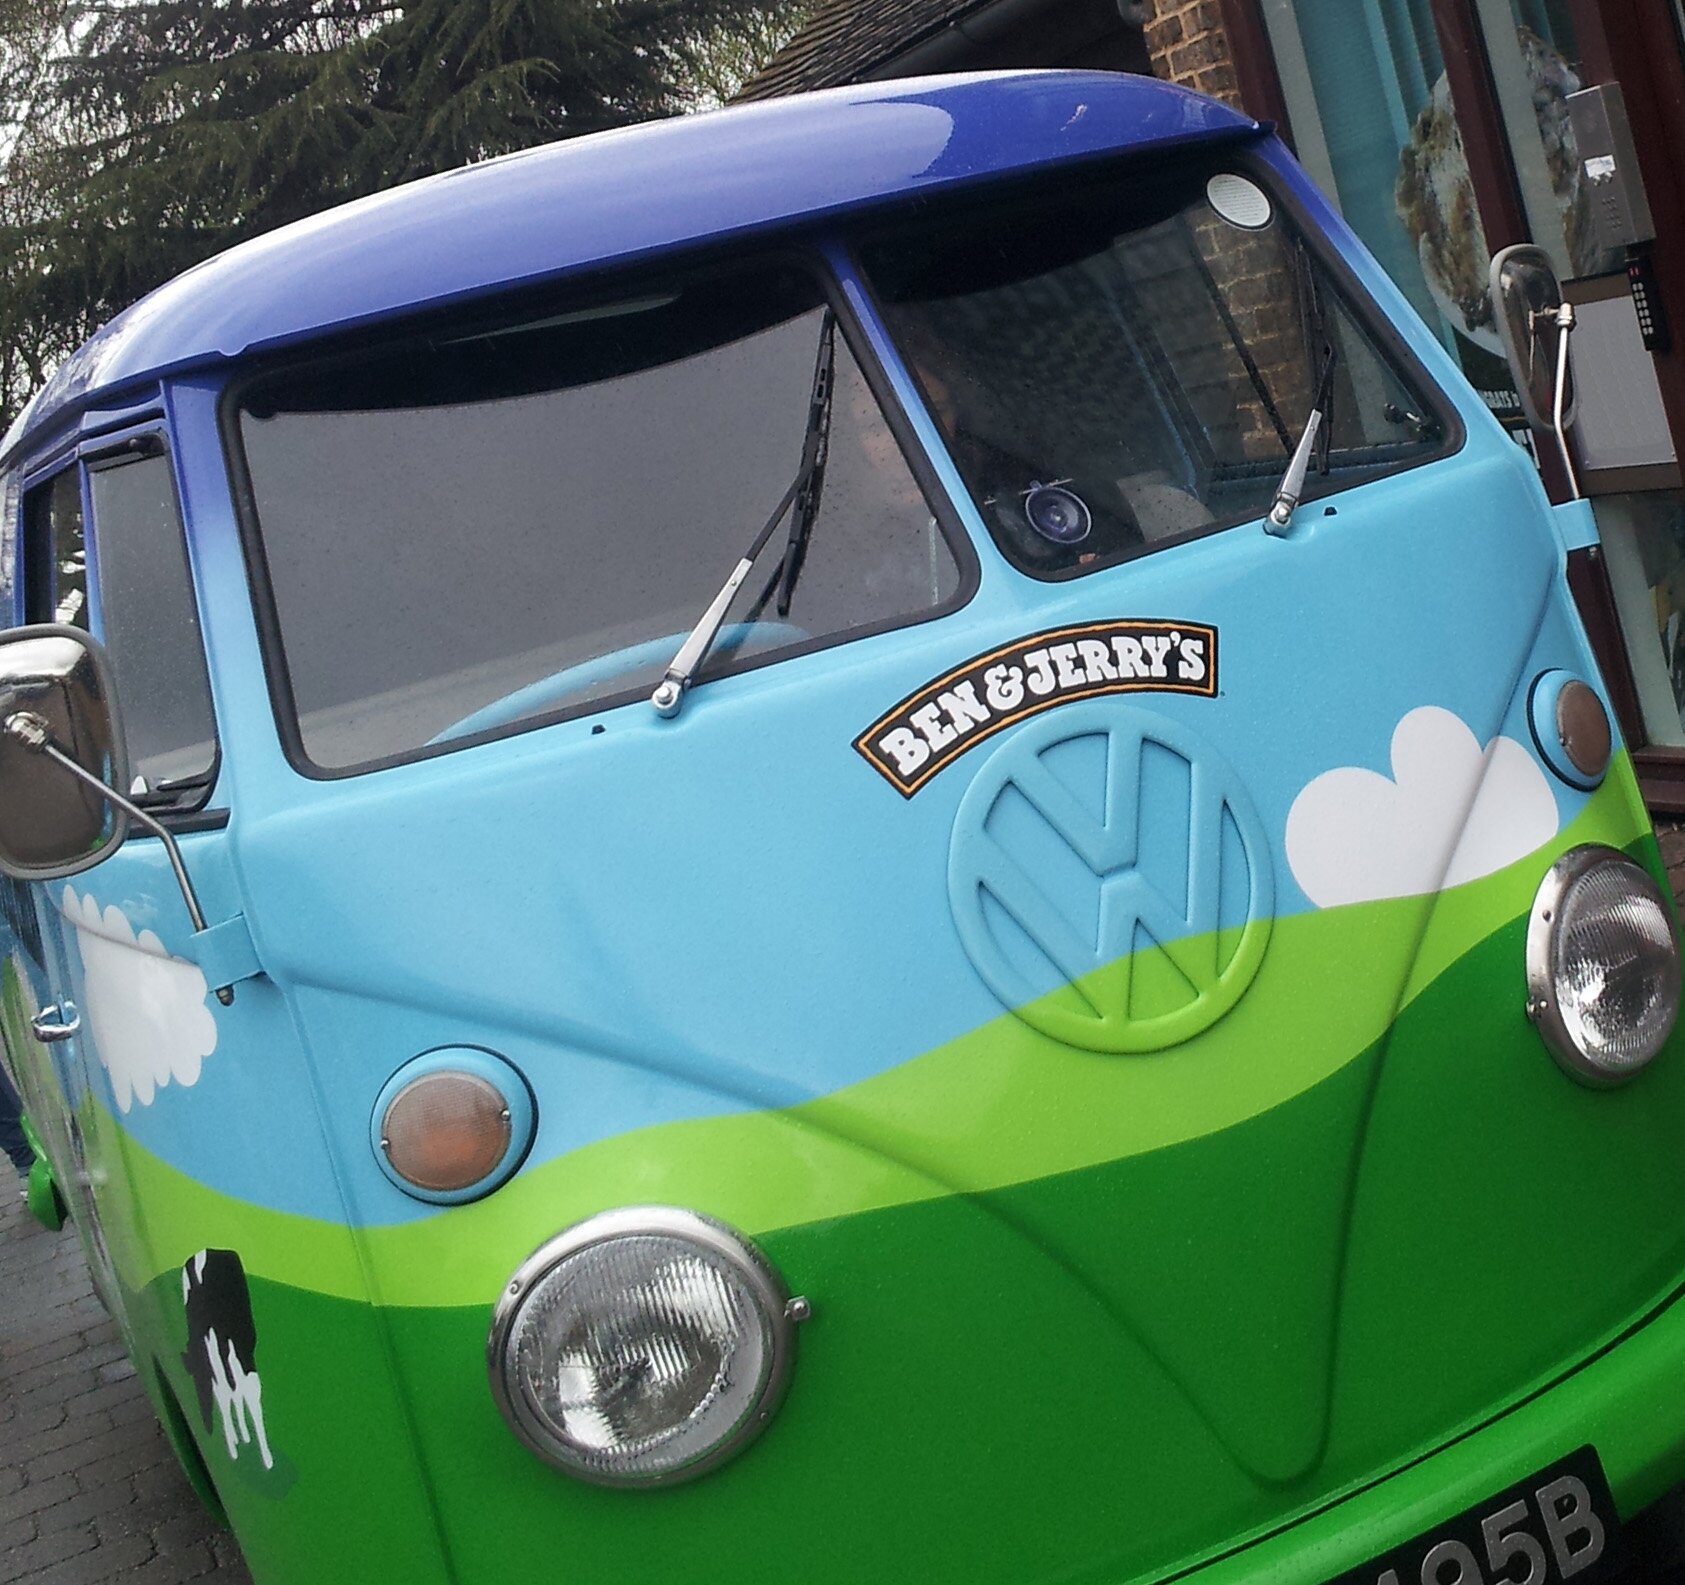 Our 1964 VW has been fixed up & is ready to hit the road & spread peace, love & fairtrade ice cream! (Not affiliated/endorsed by Volkswagen or its subsidiaries)